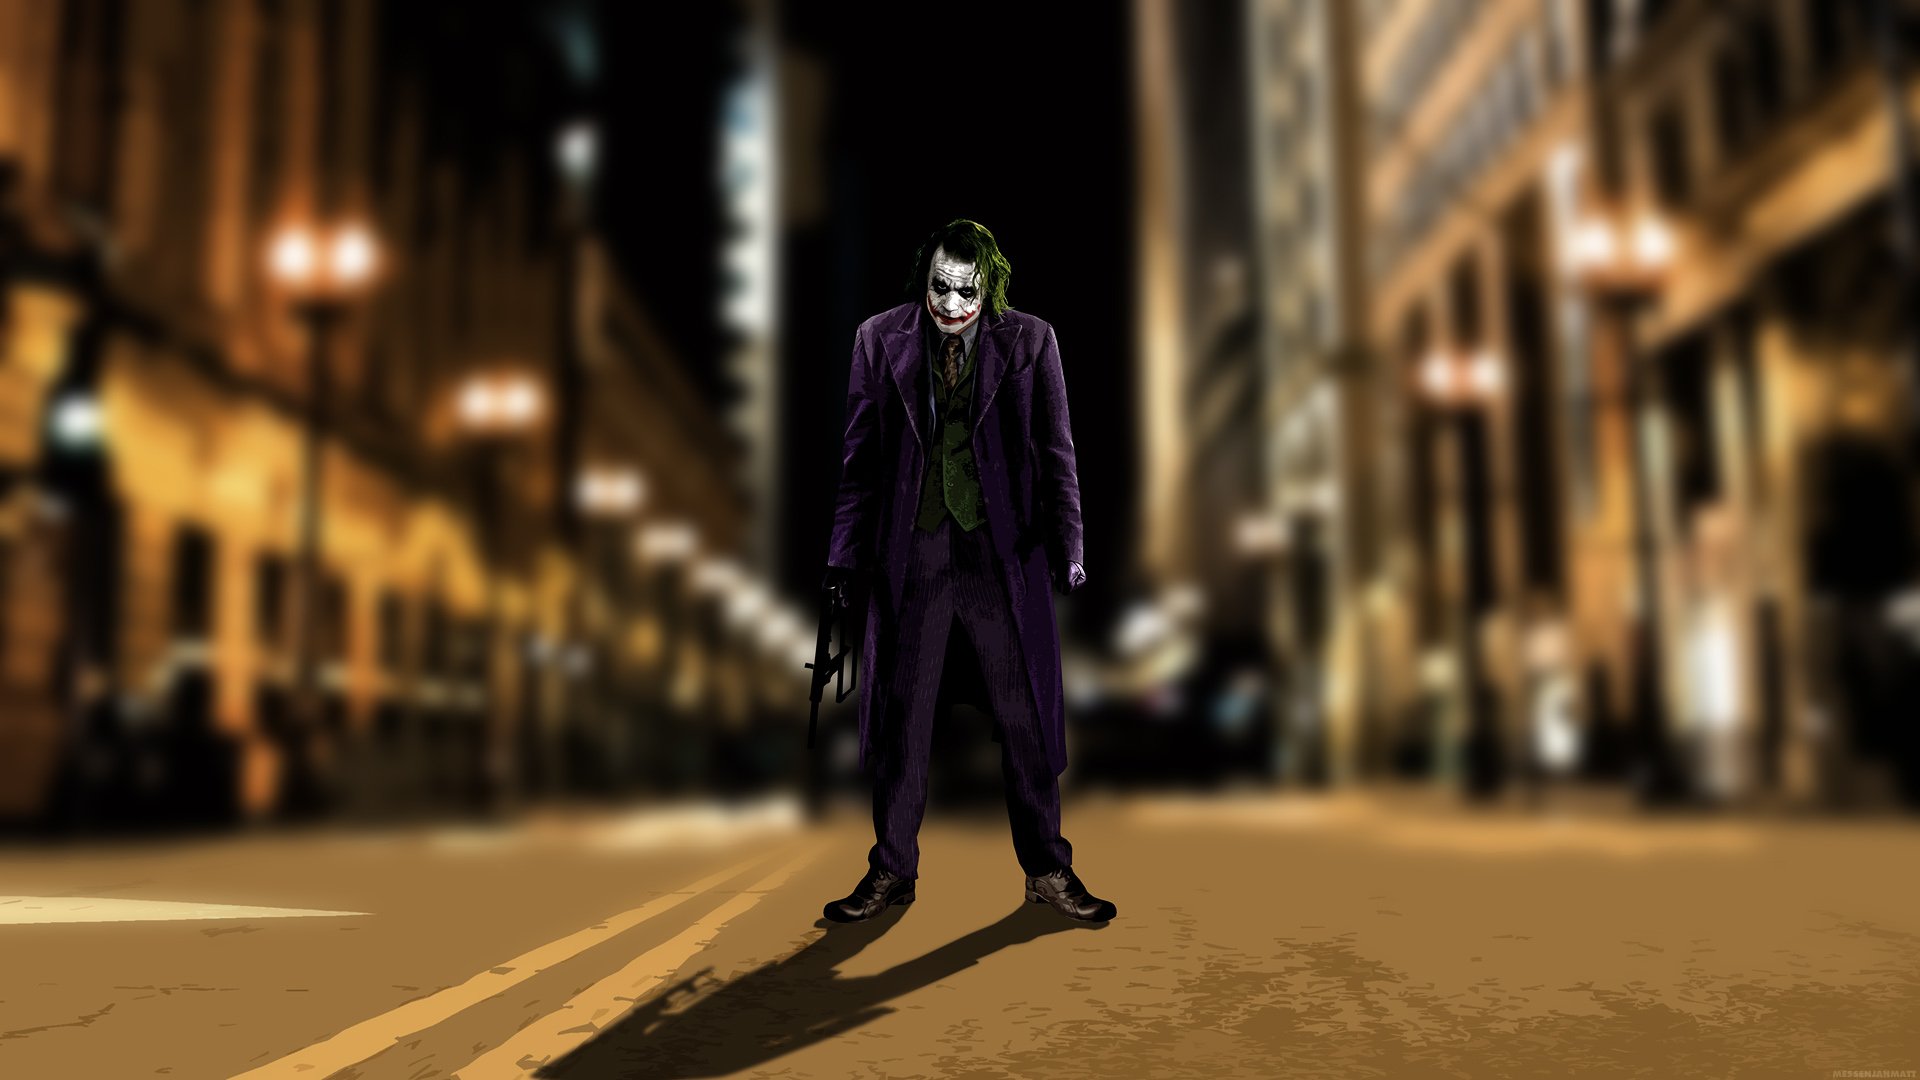 The Dark Knight download the new for ios